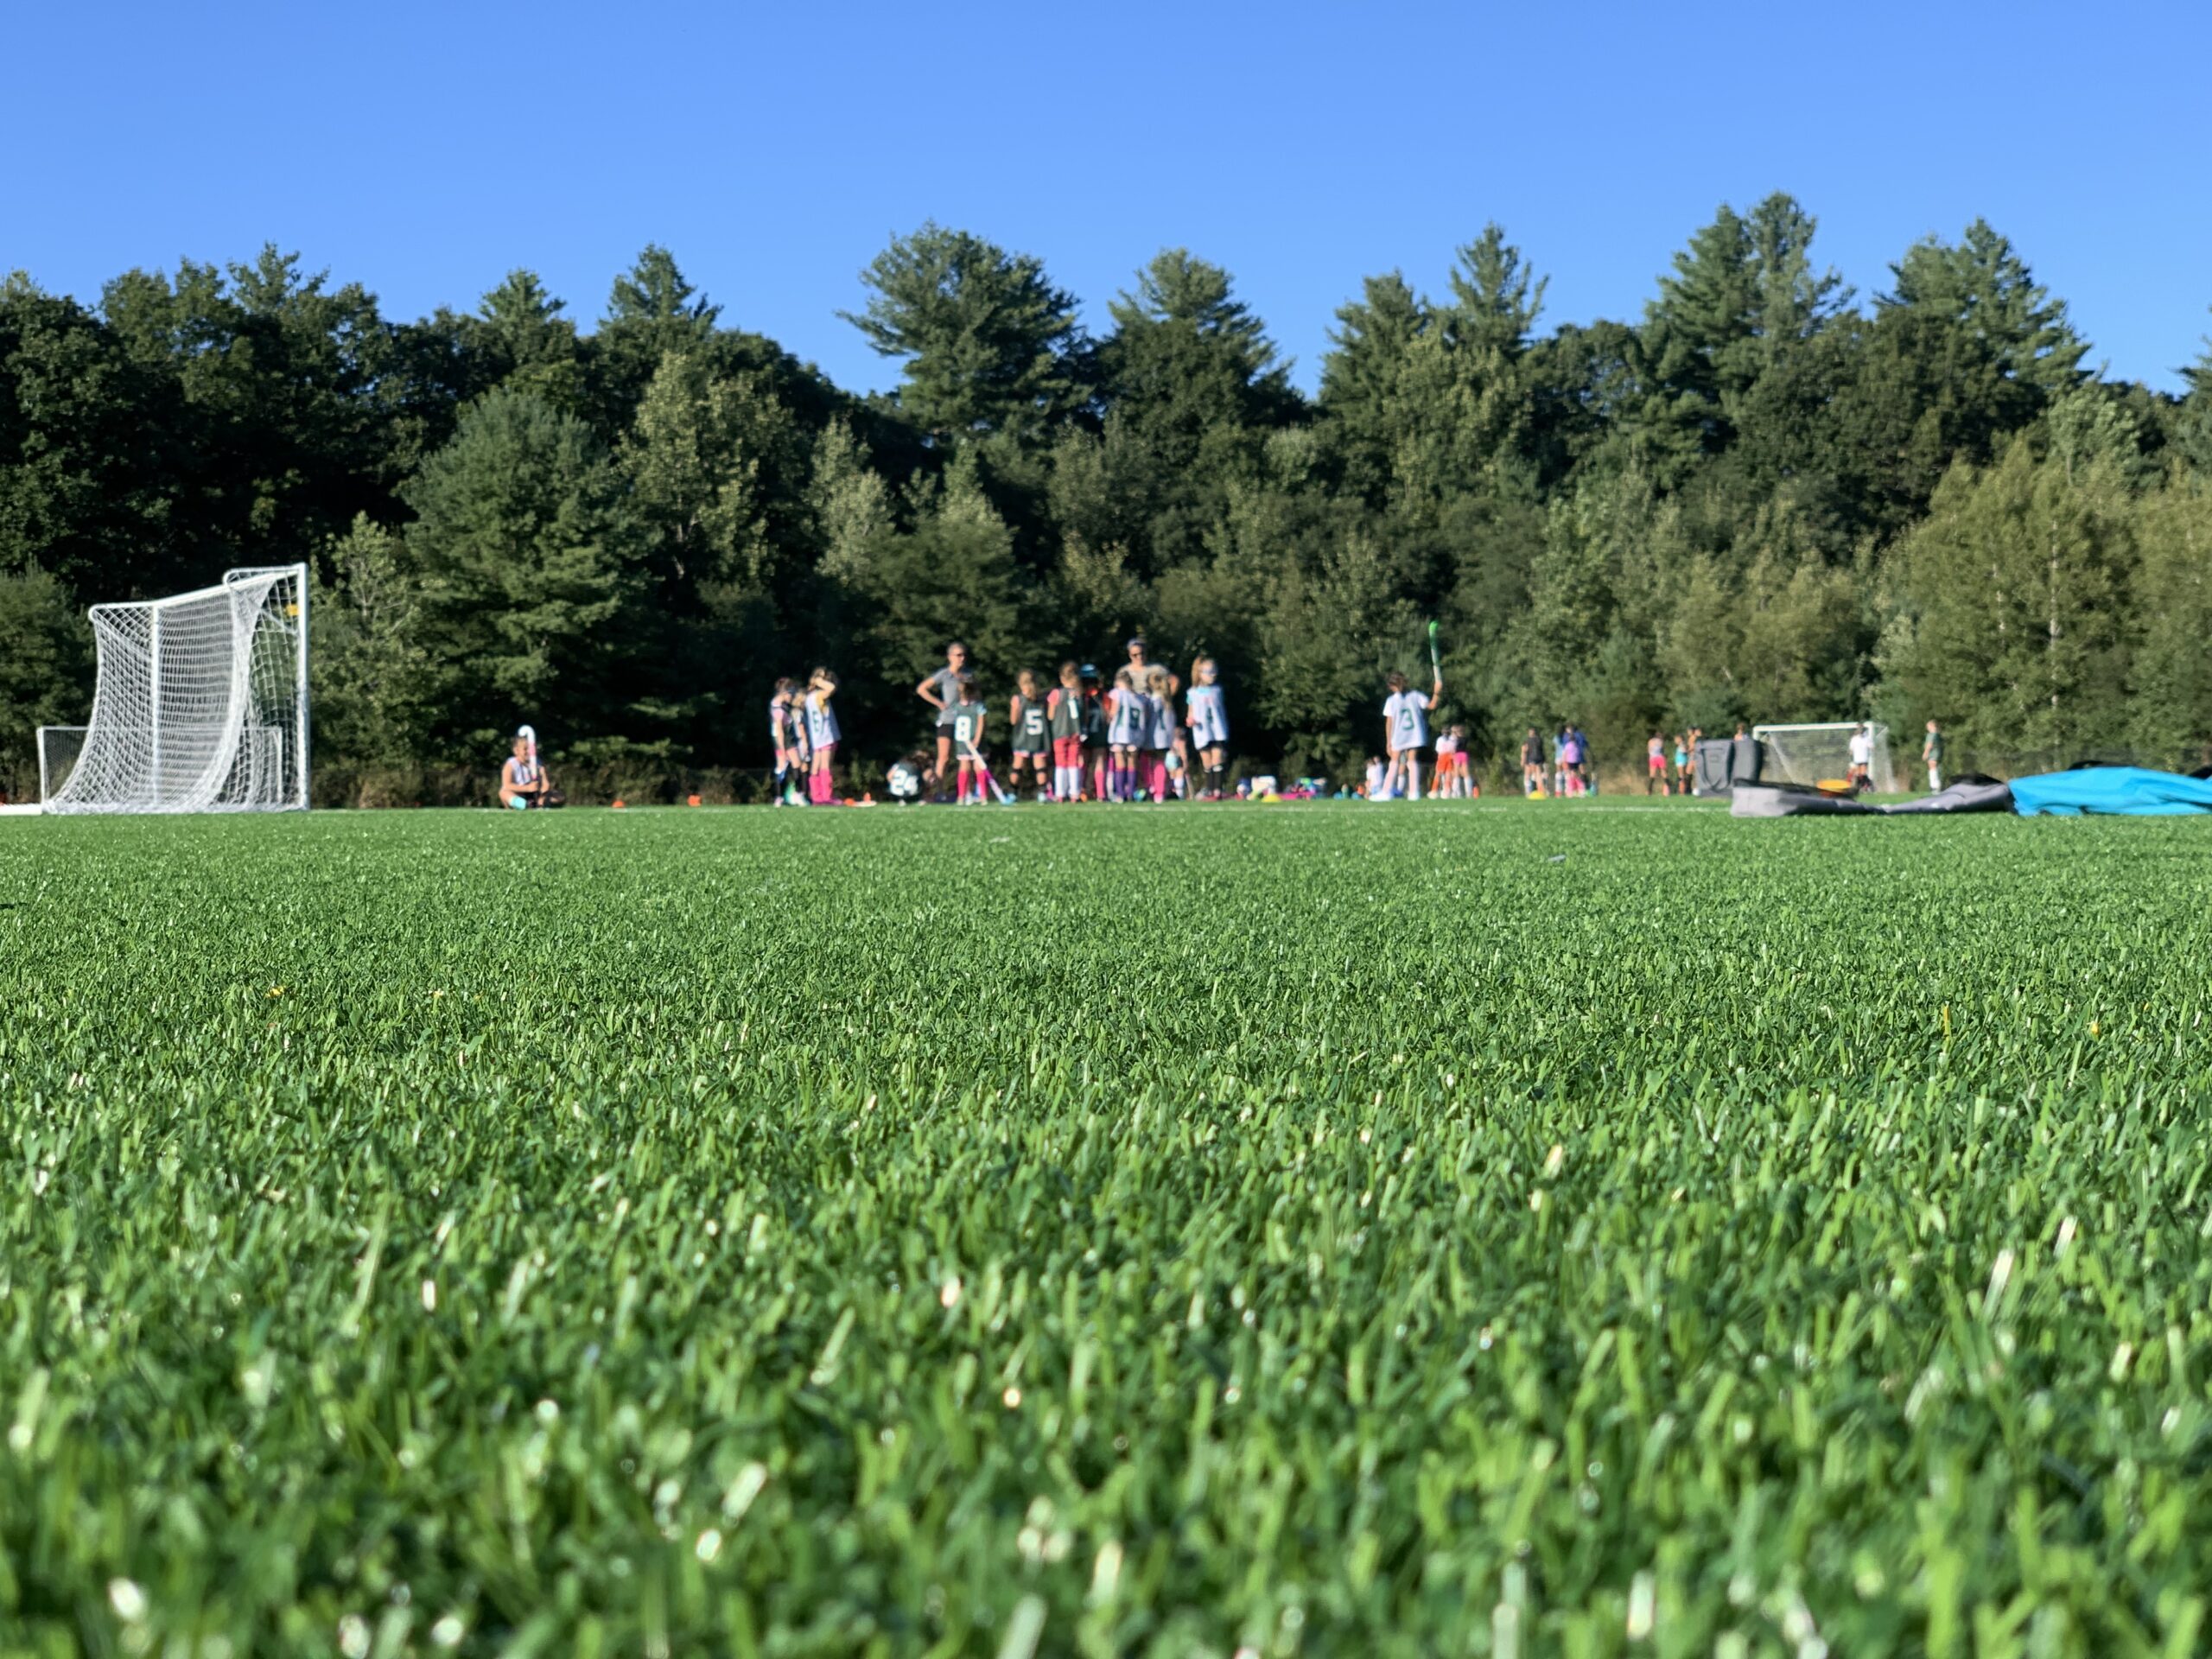 Parks & Rec roundup: Commission prioritizes maintenance of new turf fields